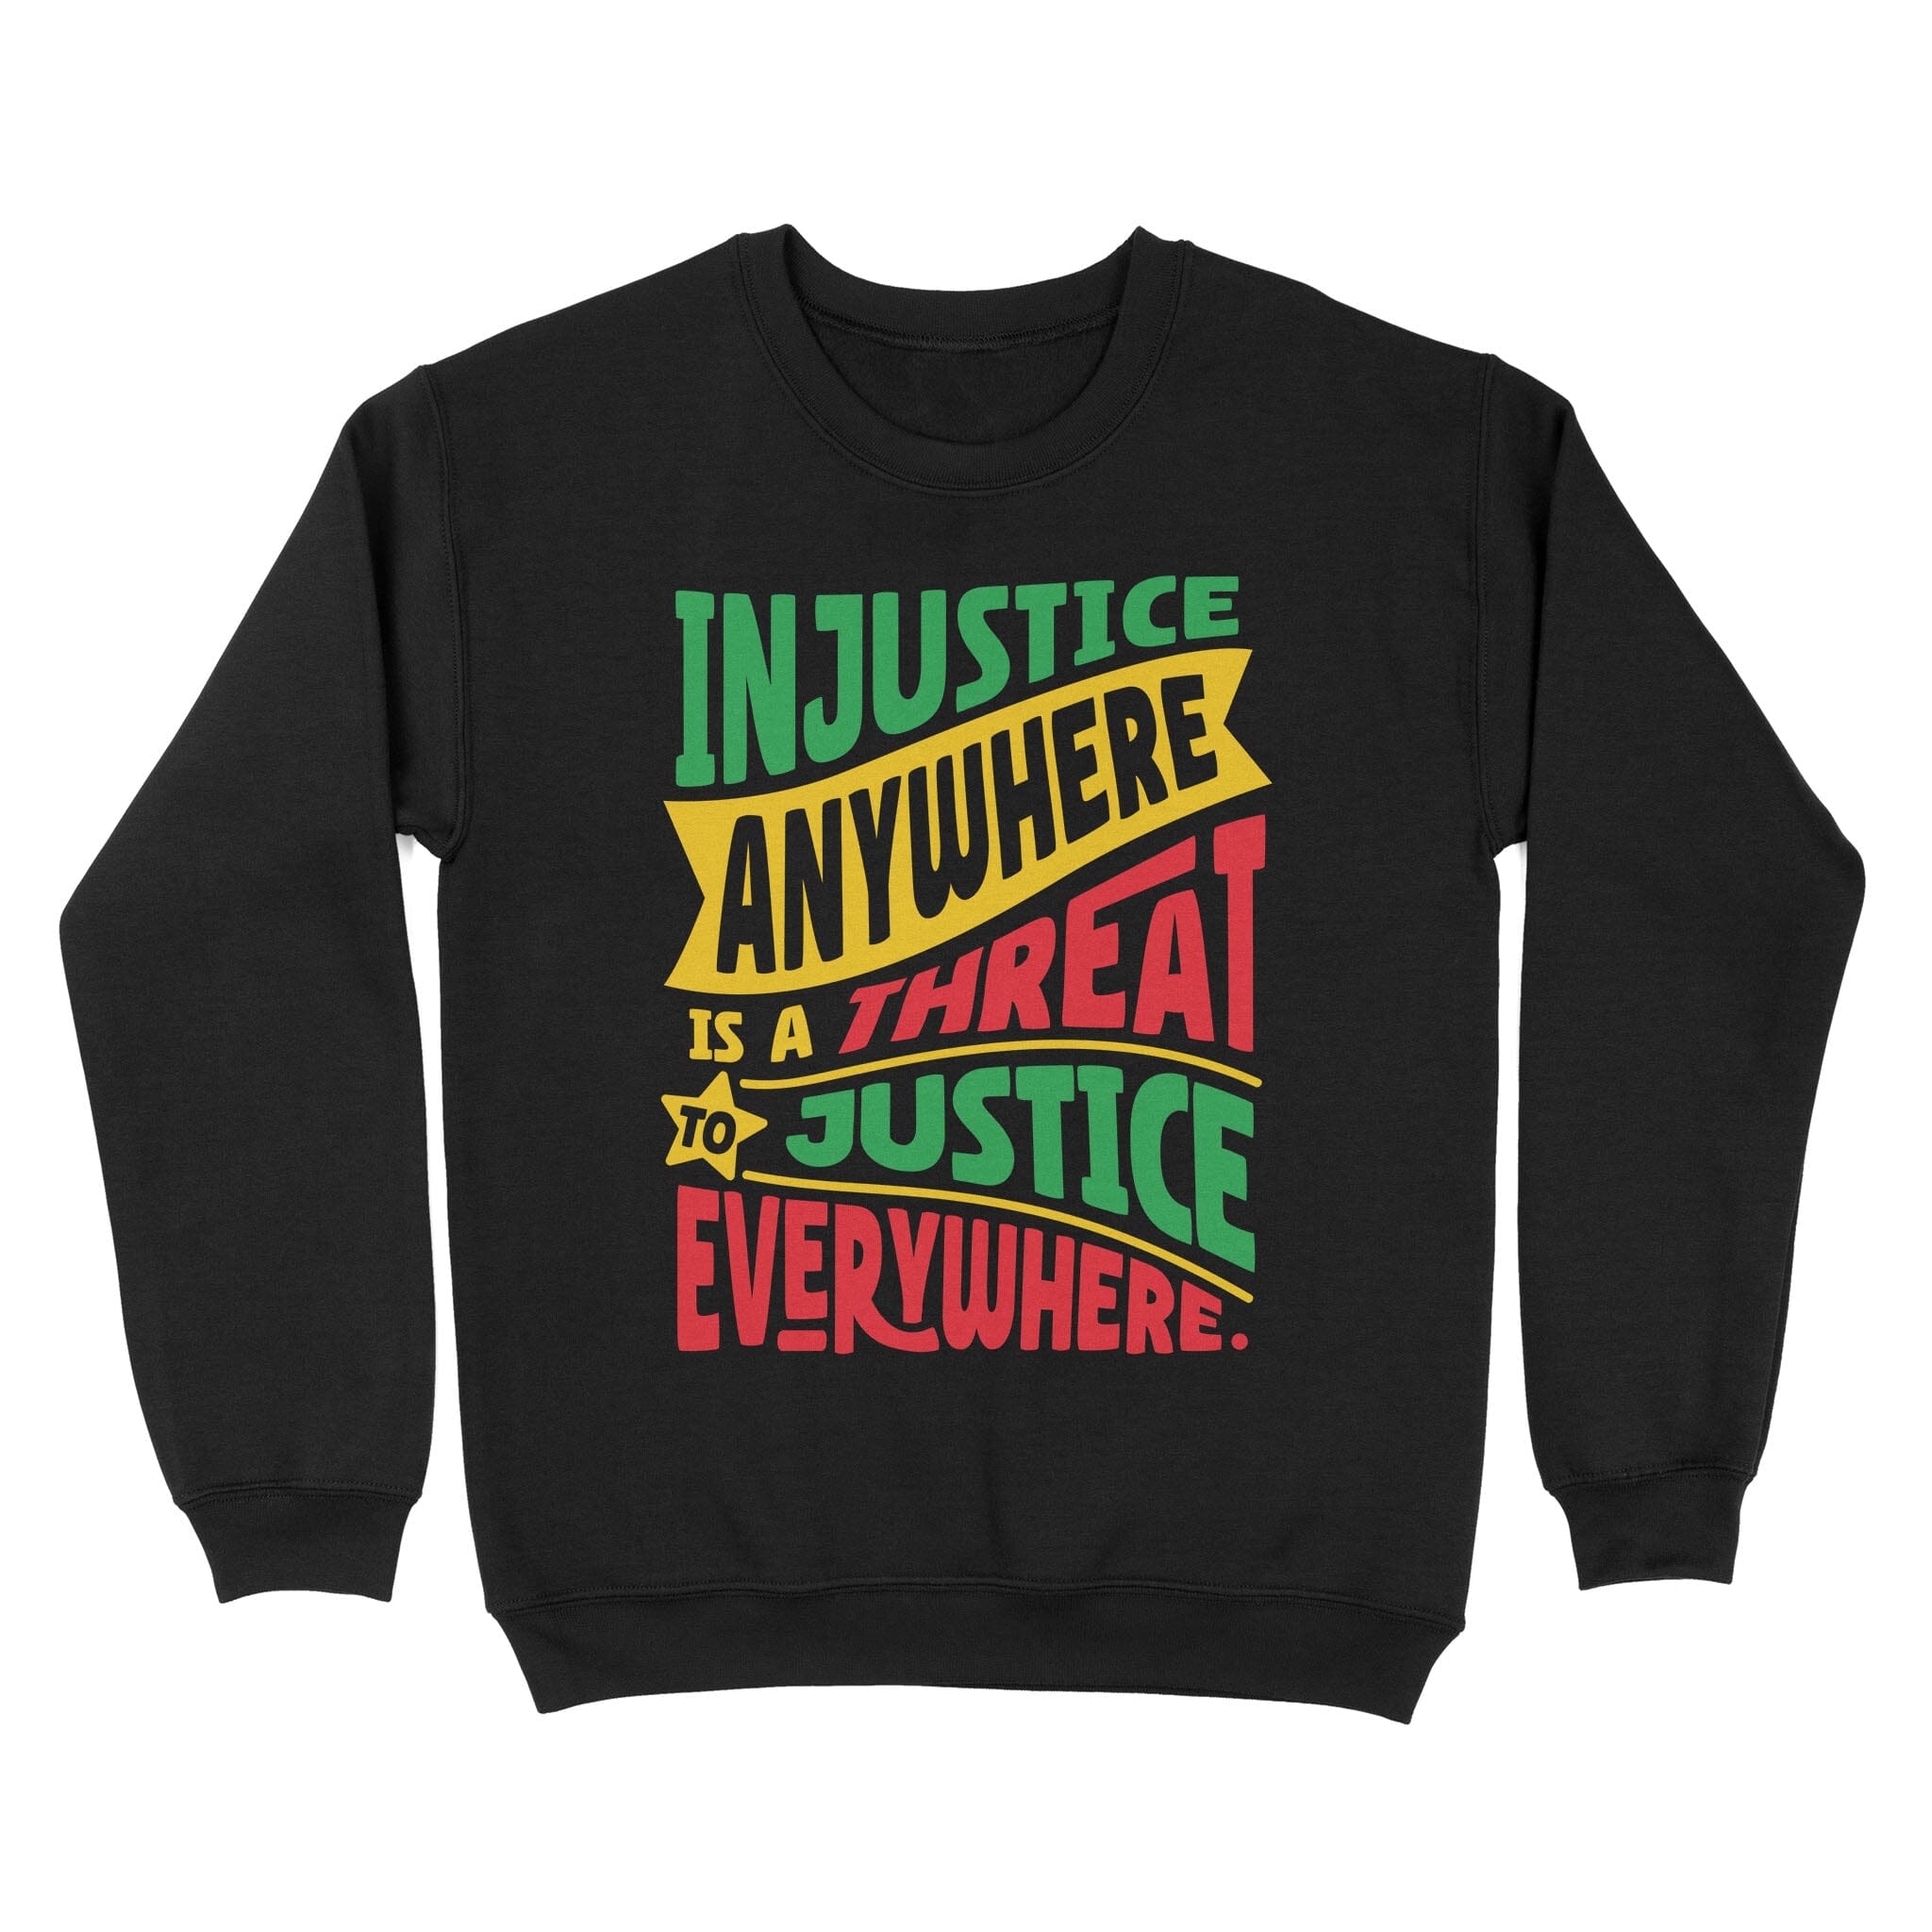 Injustice Anywhere Is A Threat To Justice Everywhere Sweatshirt Apparel Gearment Black S 